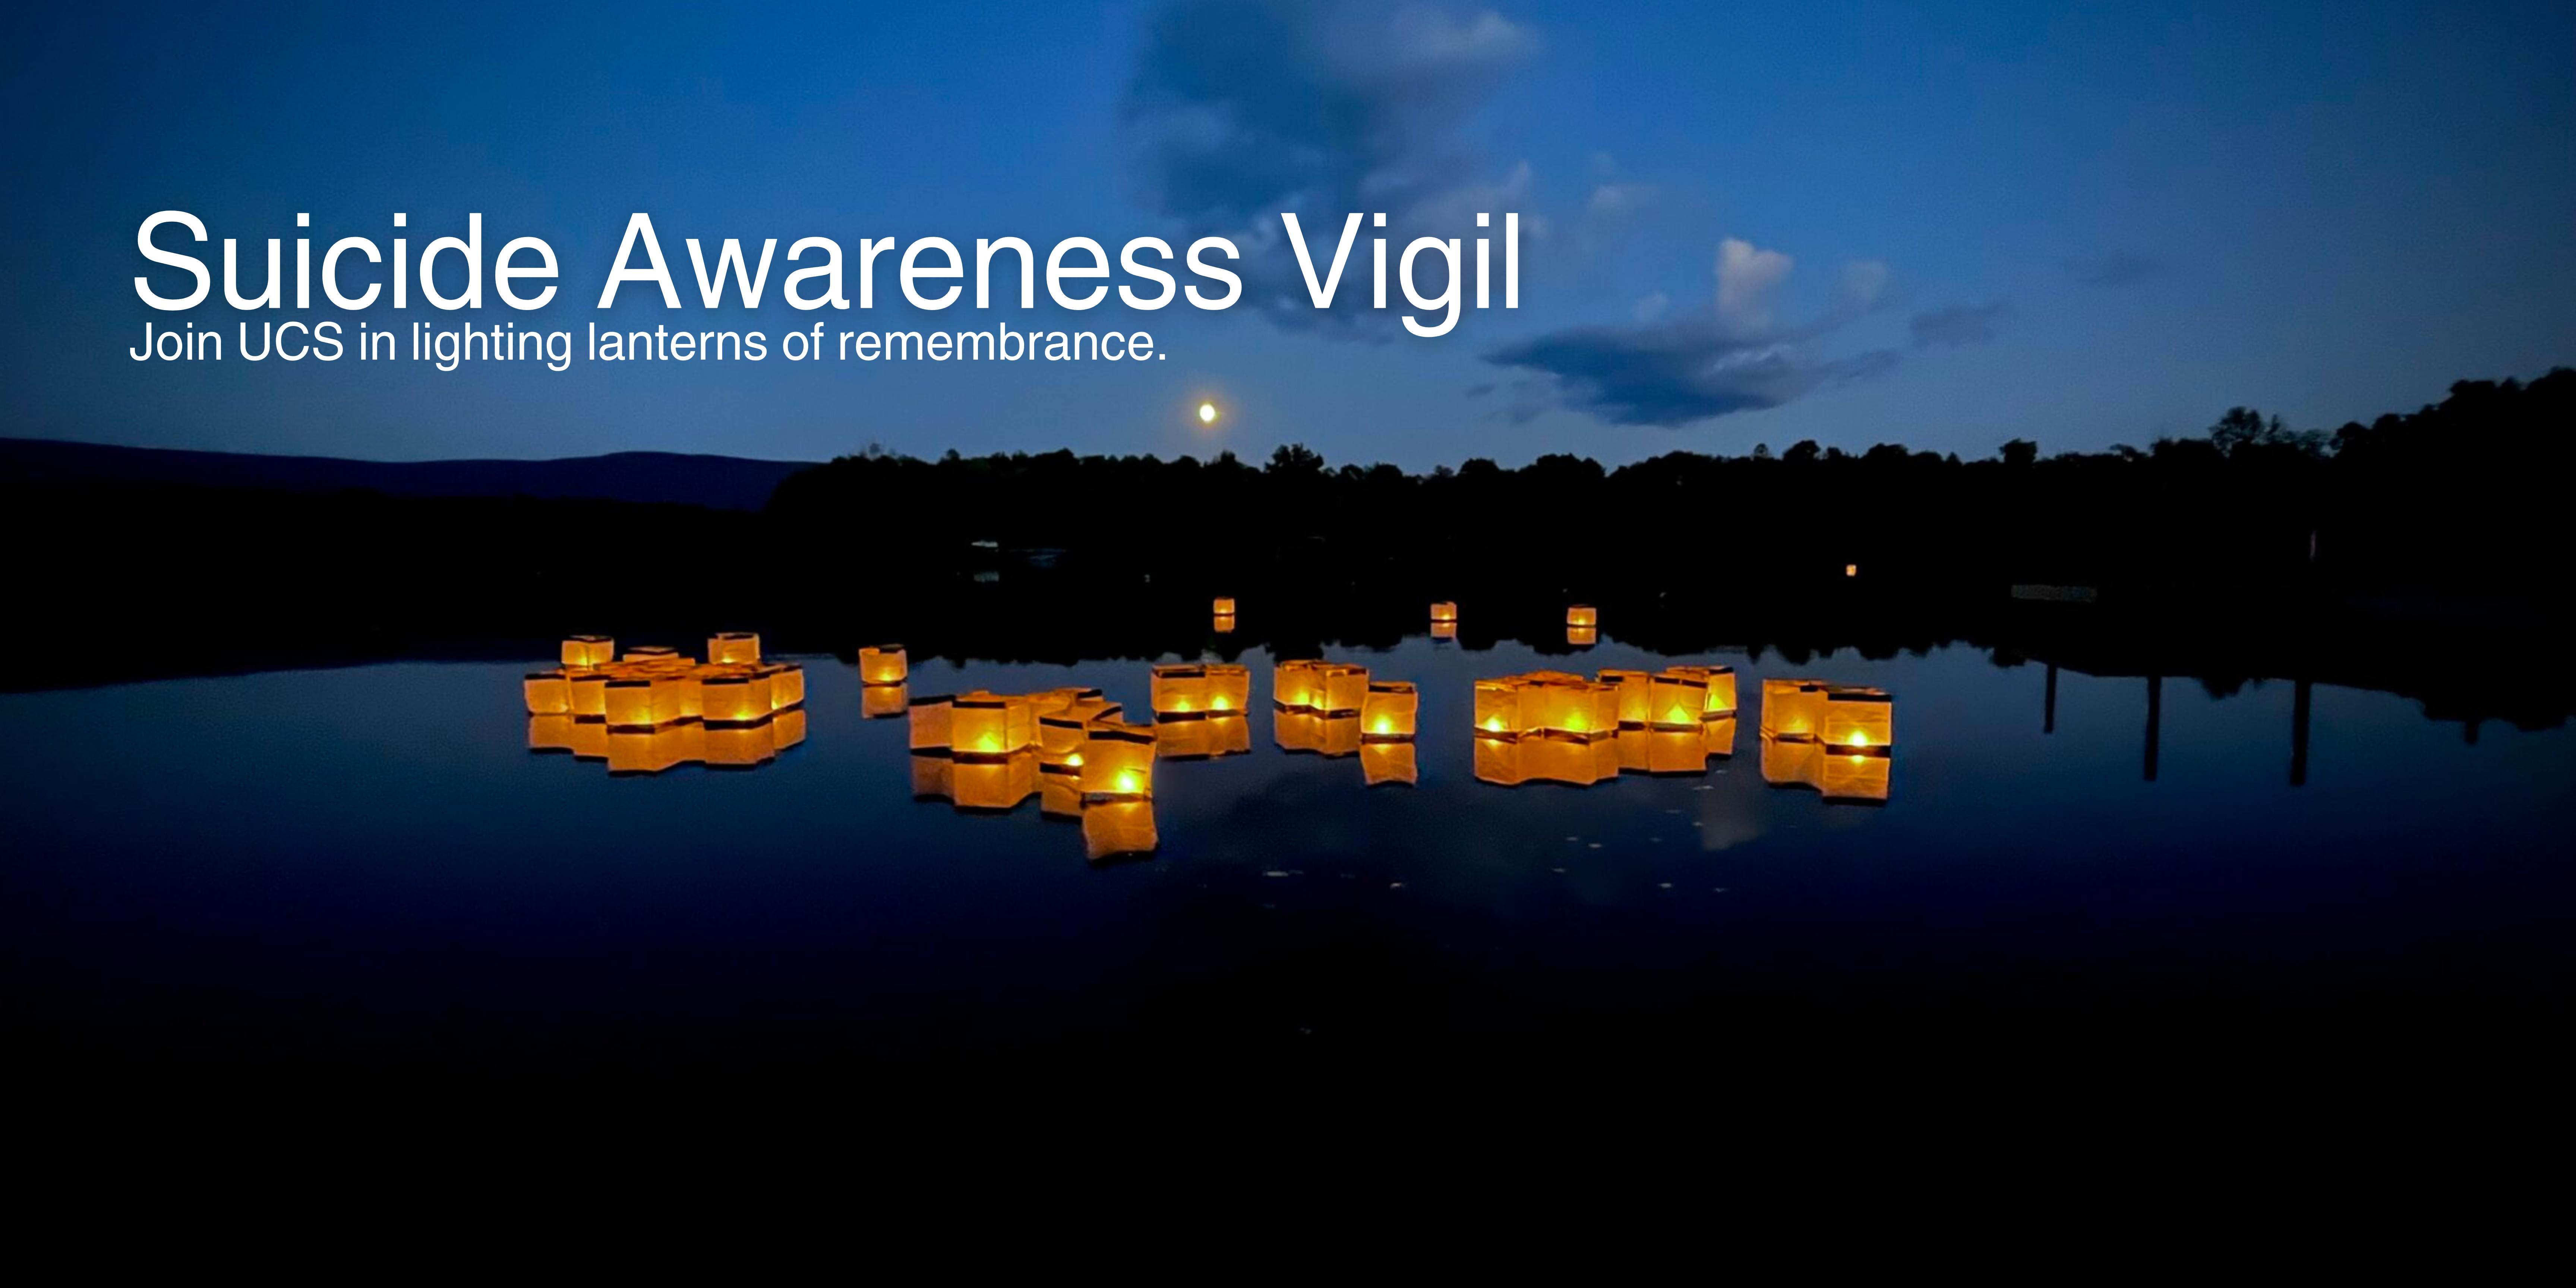 Glowing floating lanterns on a dark water with a dark blue sky with the text "Suicide Awareness Vigil. Join UCS in lighting lanterns of remembrance."